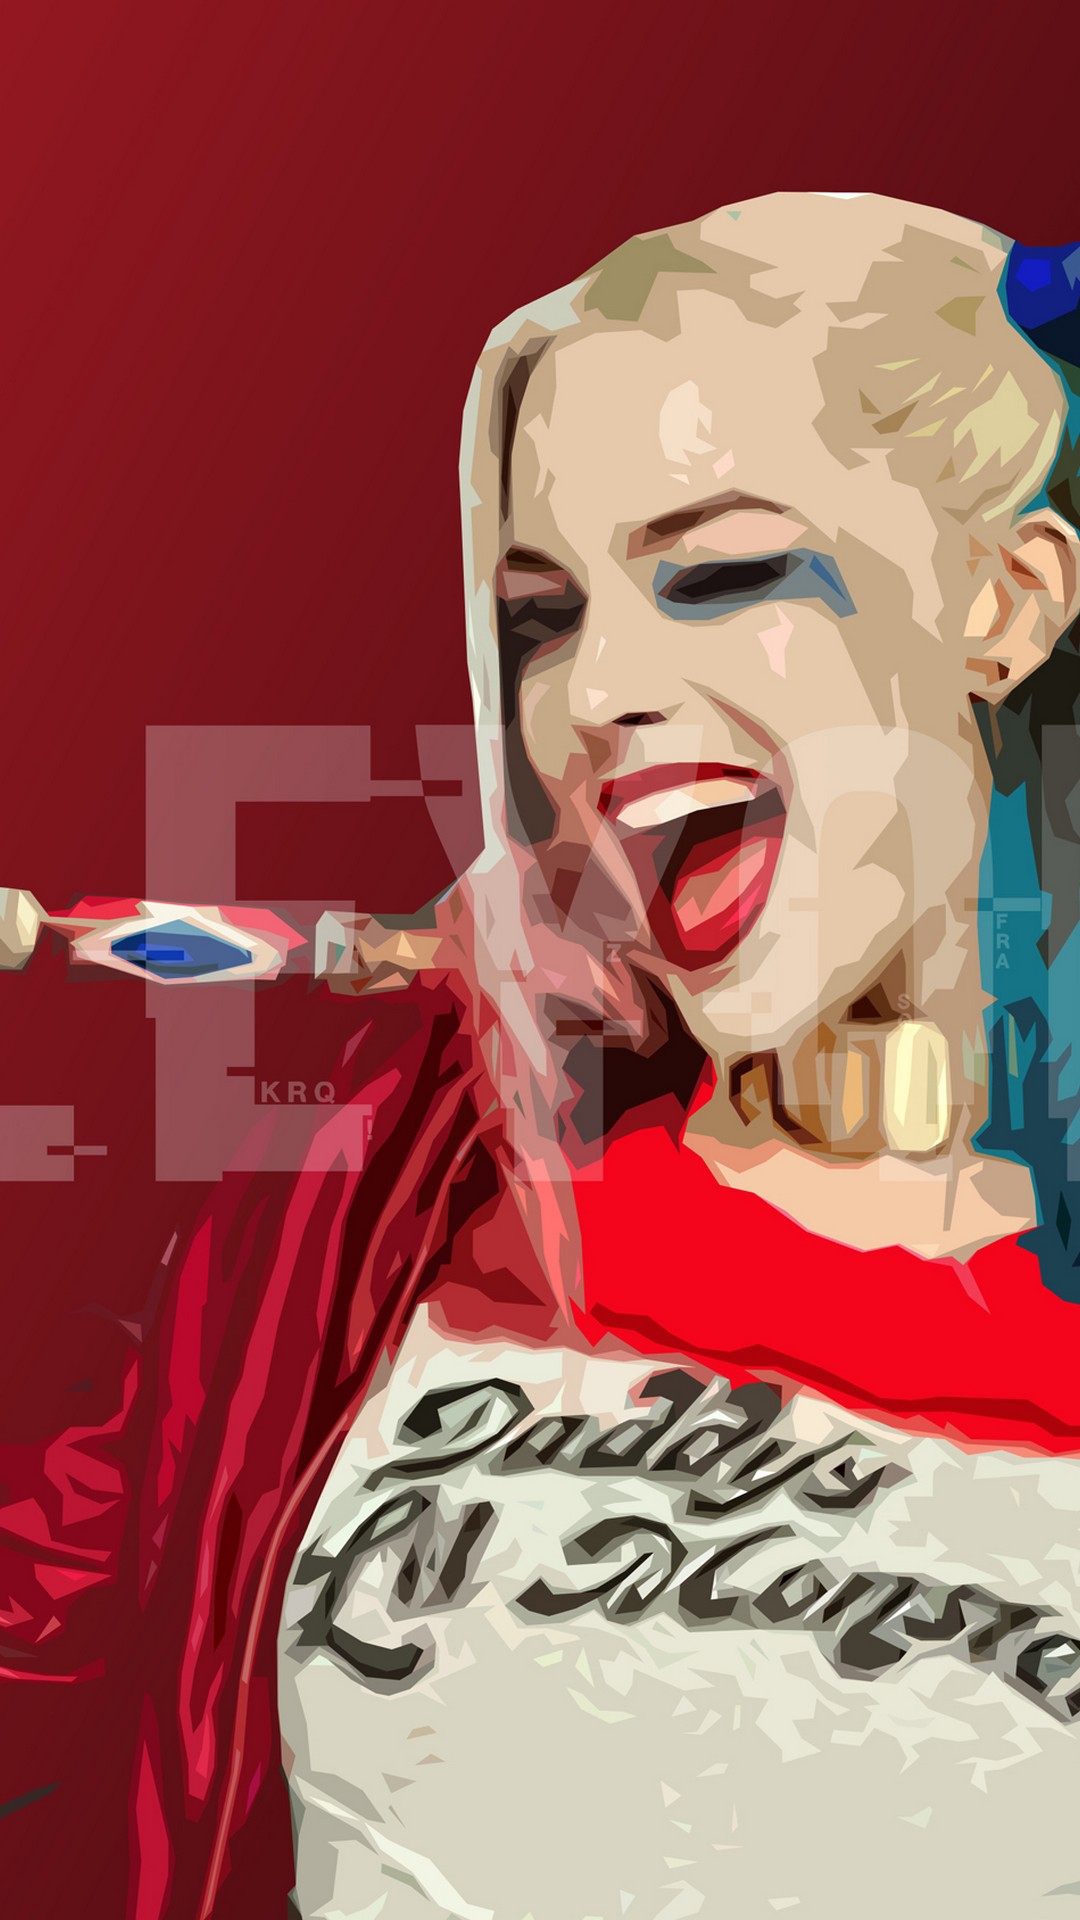 Wallpaper Harley Quinn Movie Android with image resolution 1080x1920 pixel. You can make this wallpaper for your Android backgrounds, Tablet, Smartphones Screensavers and Mobile Phone Lock Screen